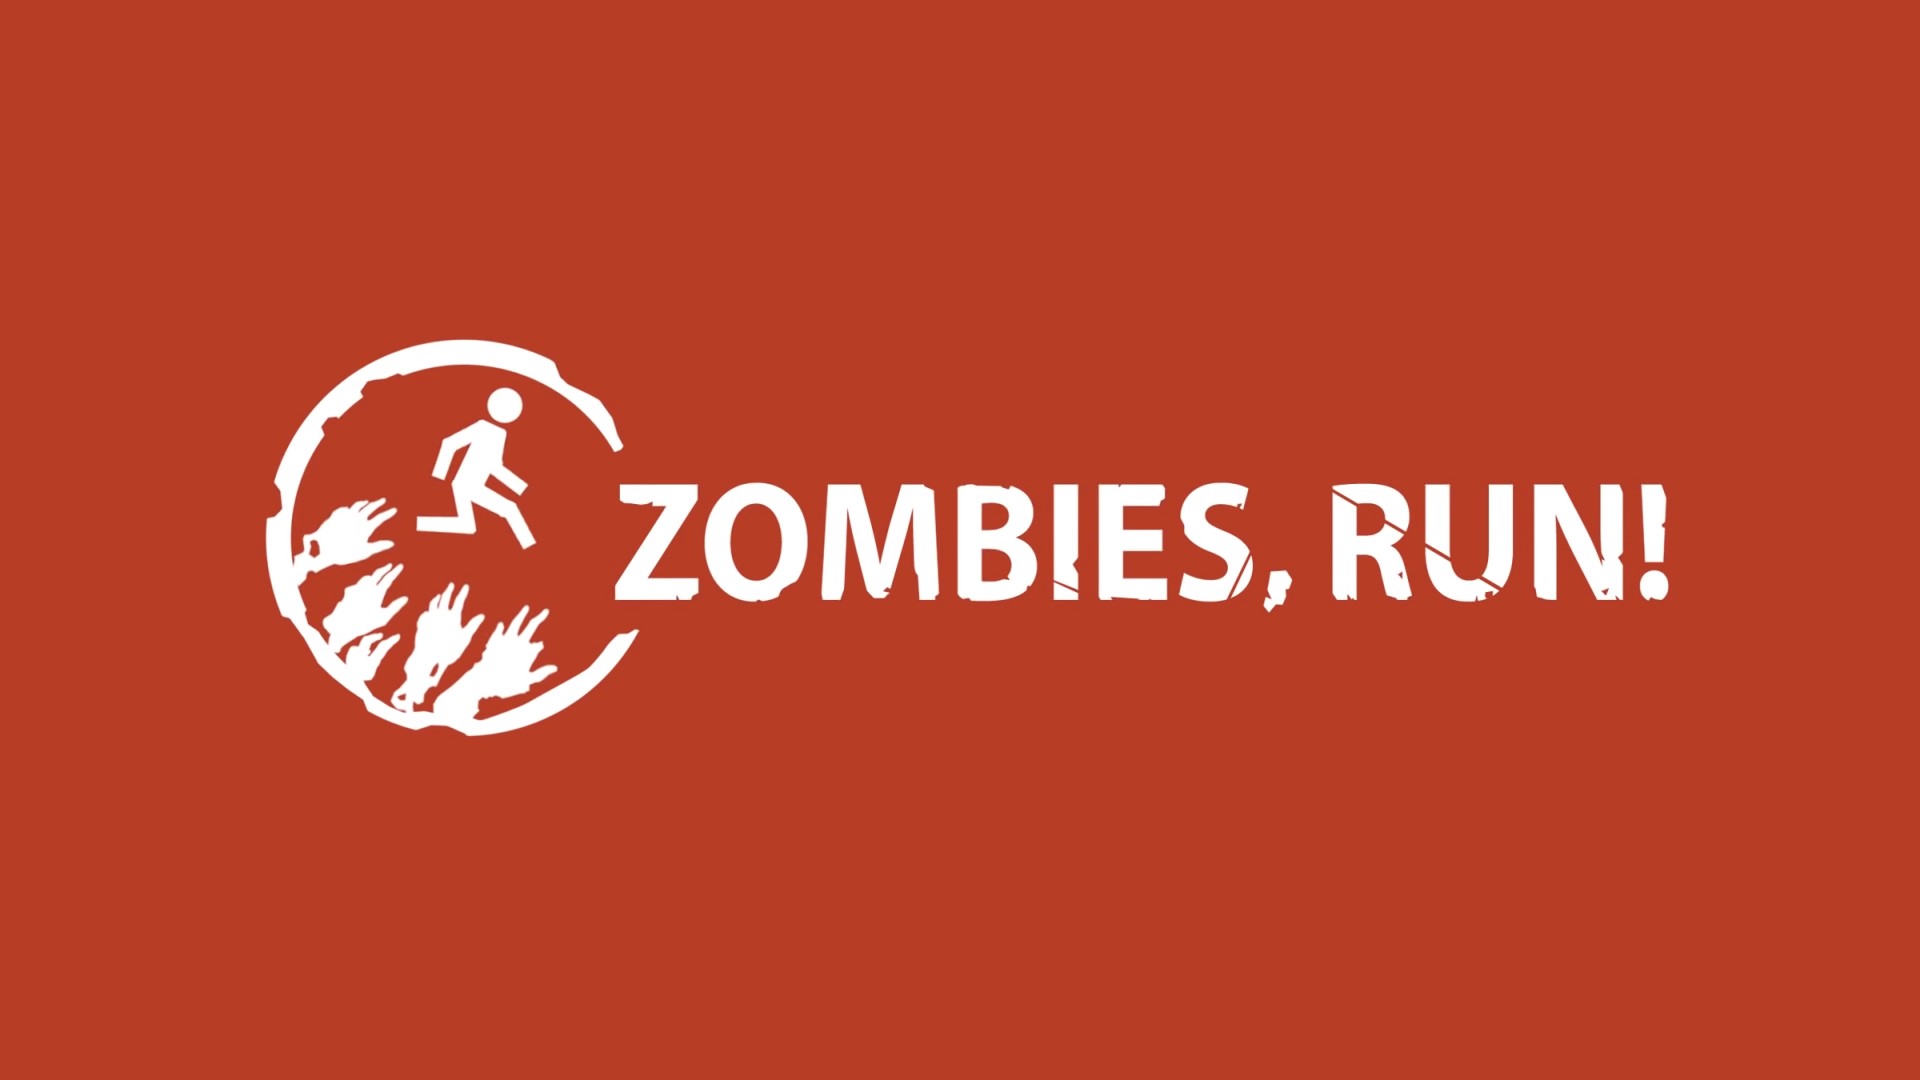 Games like Pokémon Go - A red image with Zombies, Run! written across it